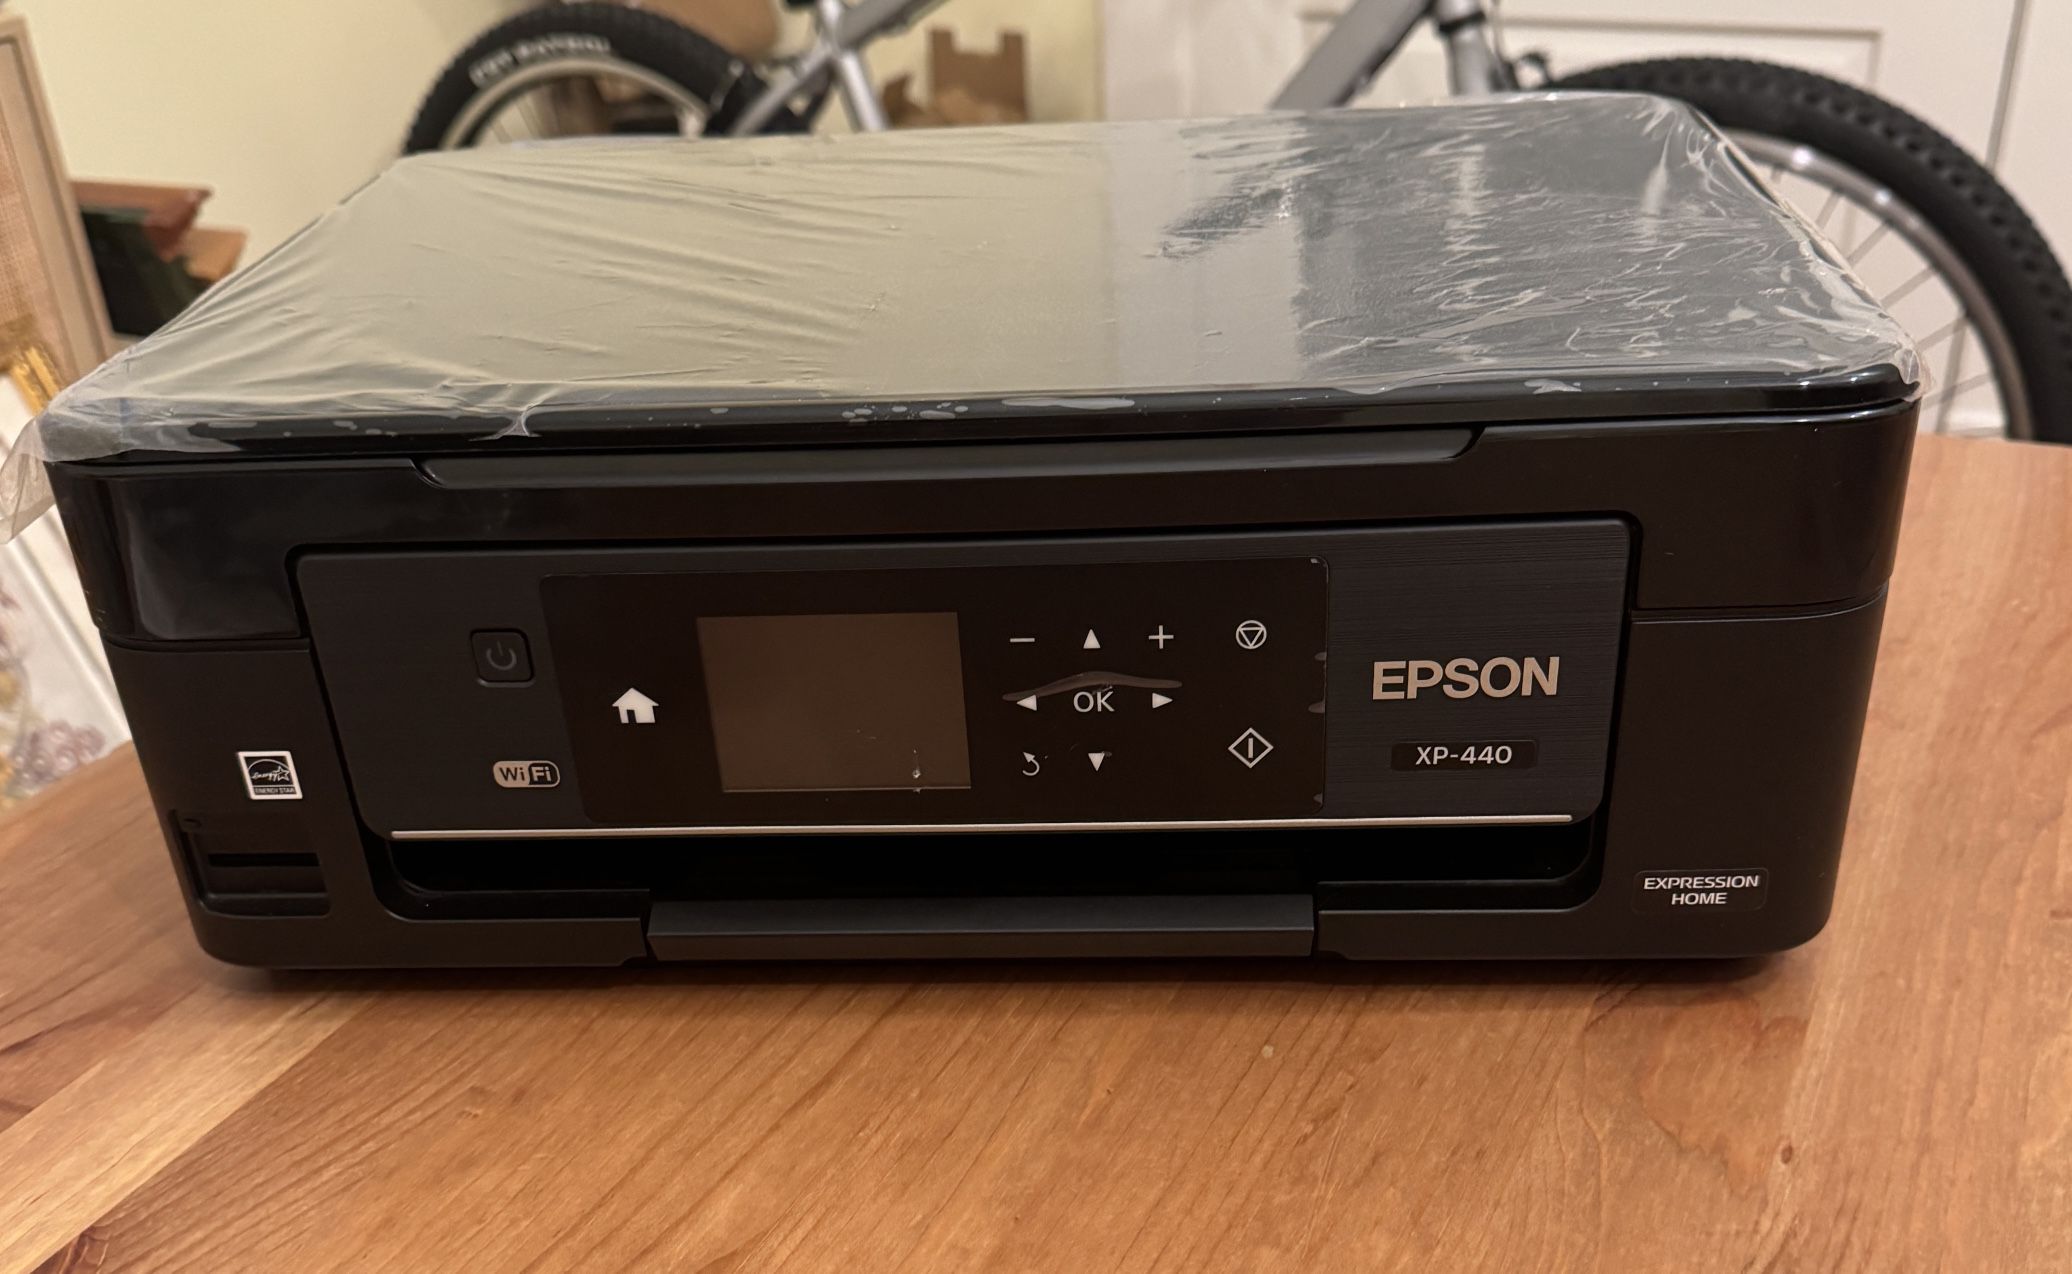 Epson XP-440 Expression Home WIFI Printer Hardly Used -Sold Out Everywhere!